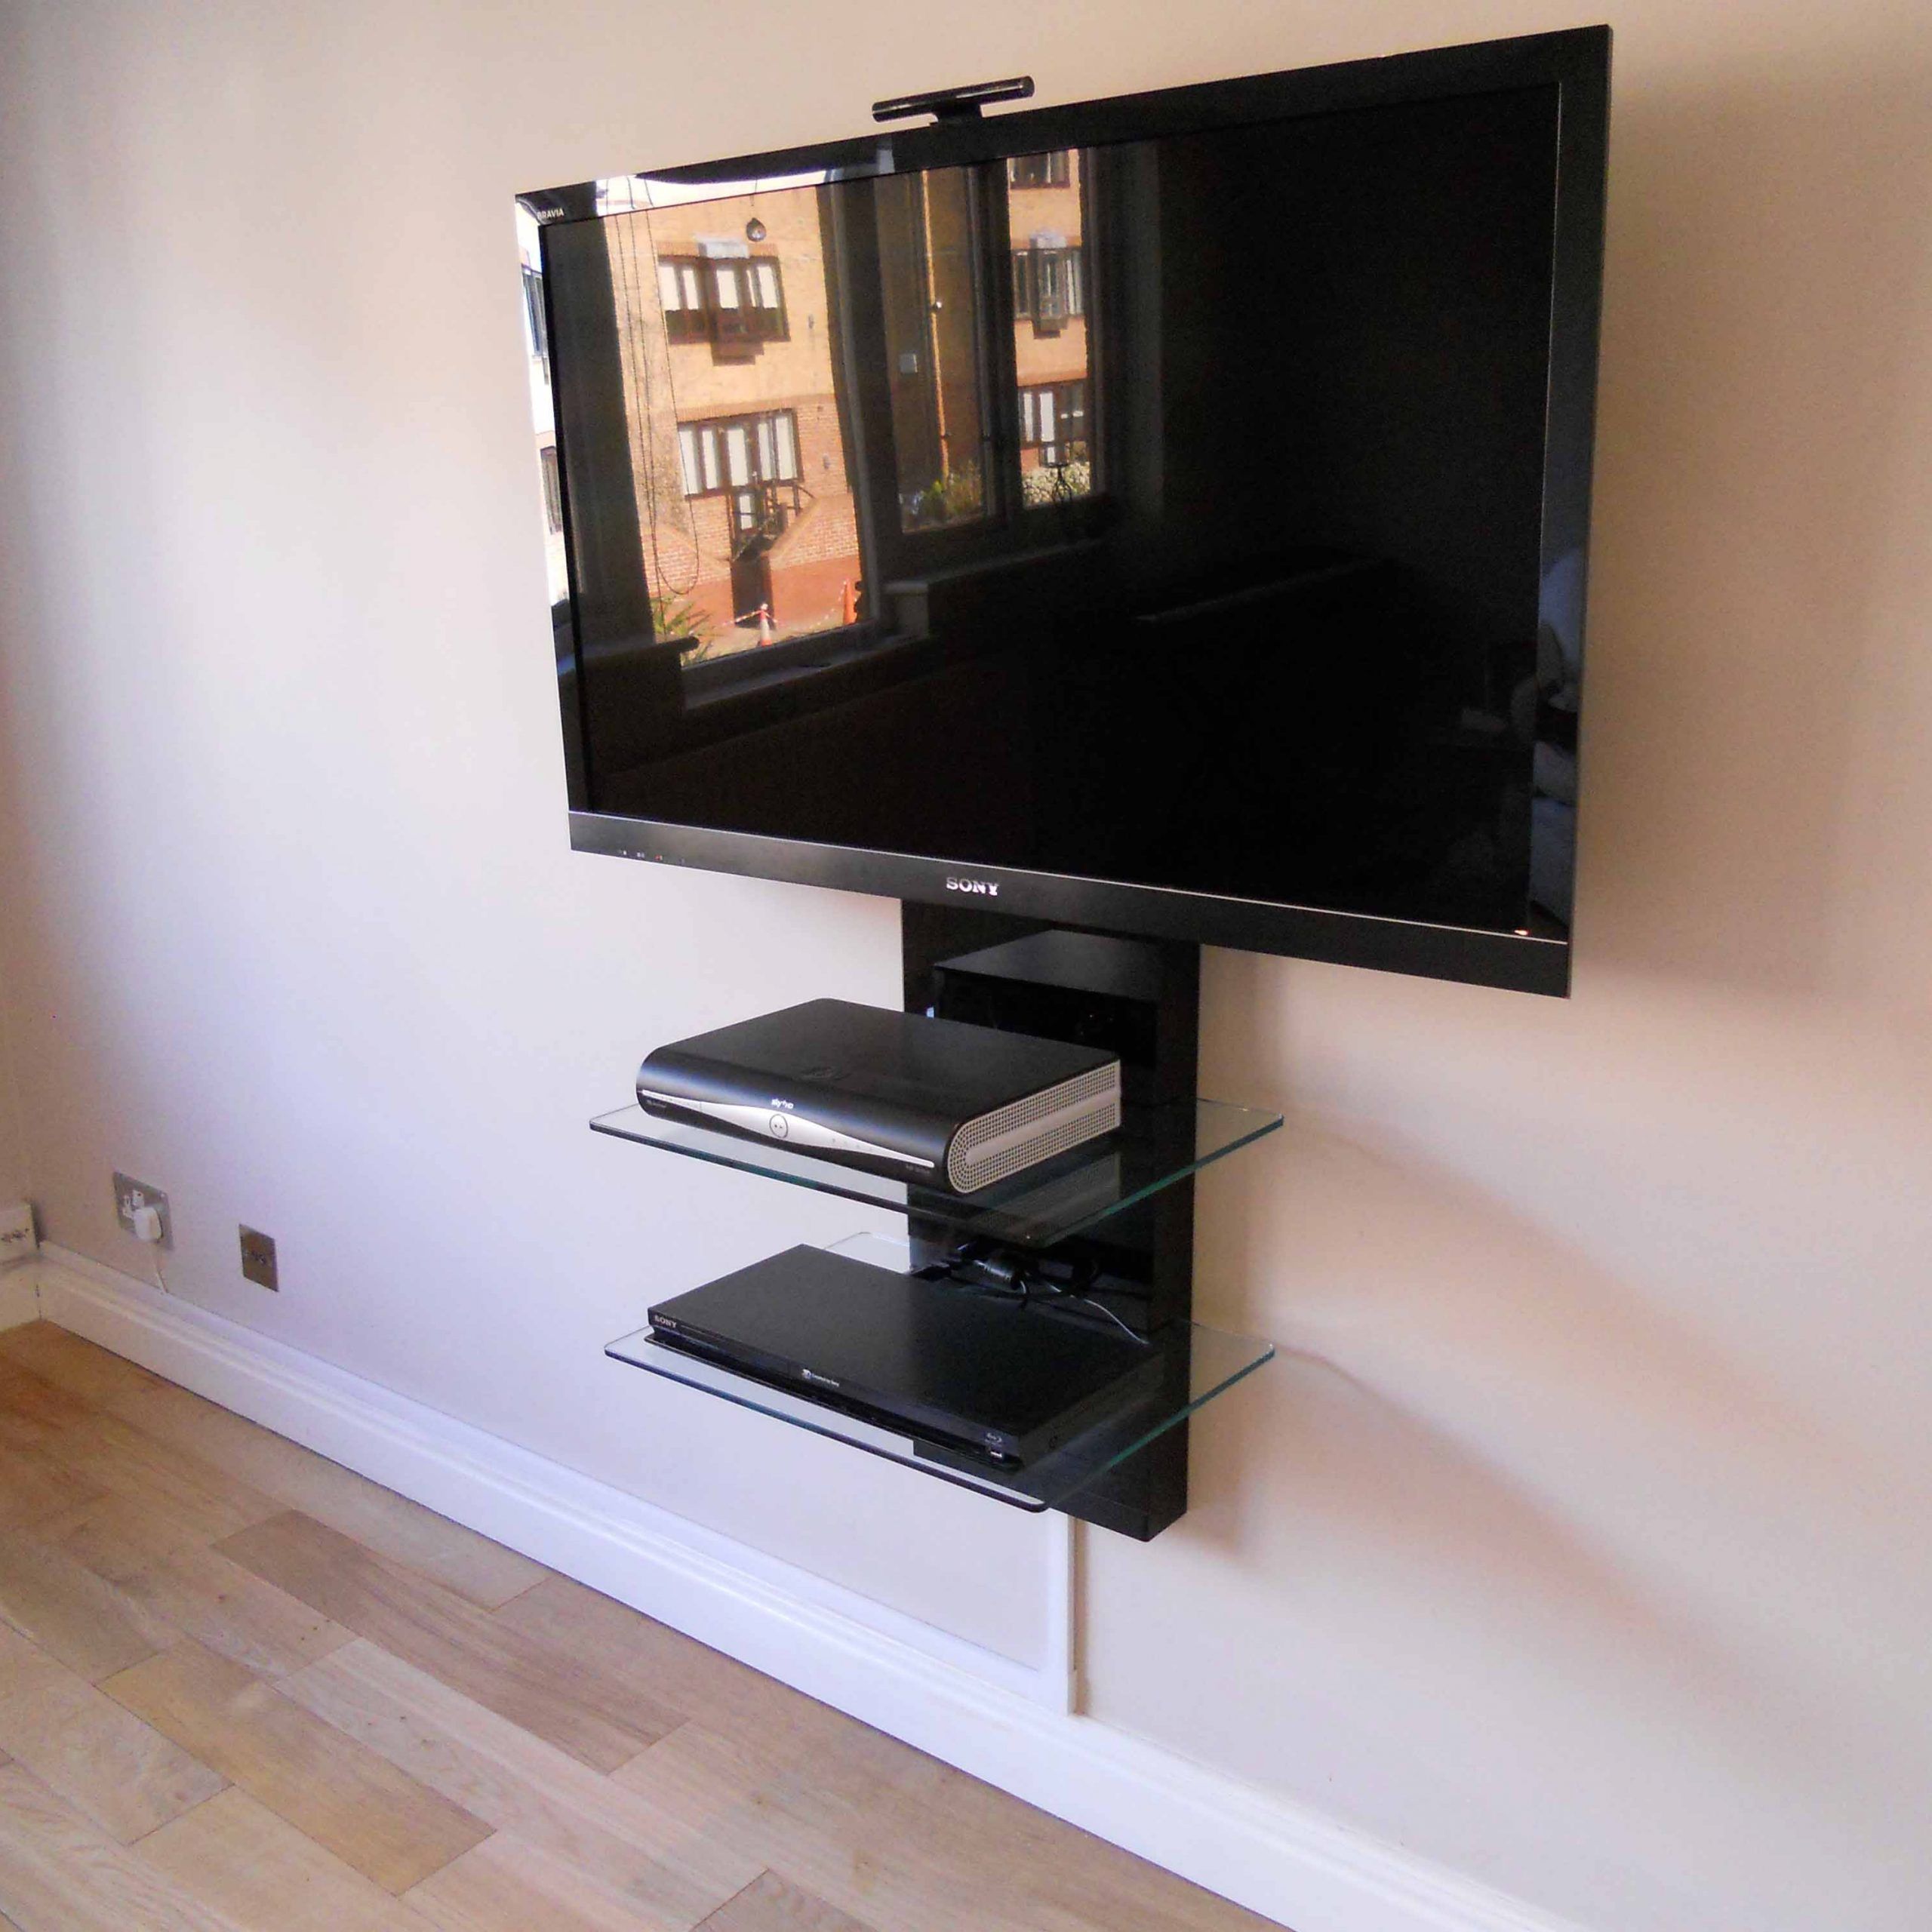 Floating Media Shelf Design – Homesfeed With Regard To Wall Mounted Under Tv Cabinet (View 11 of 15)